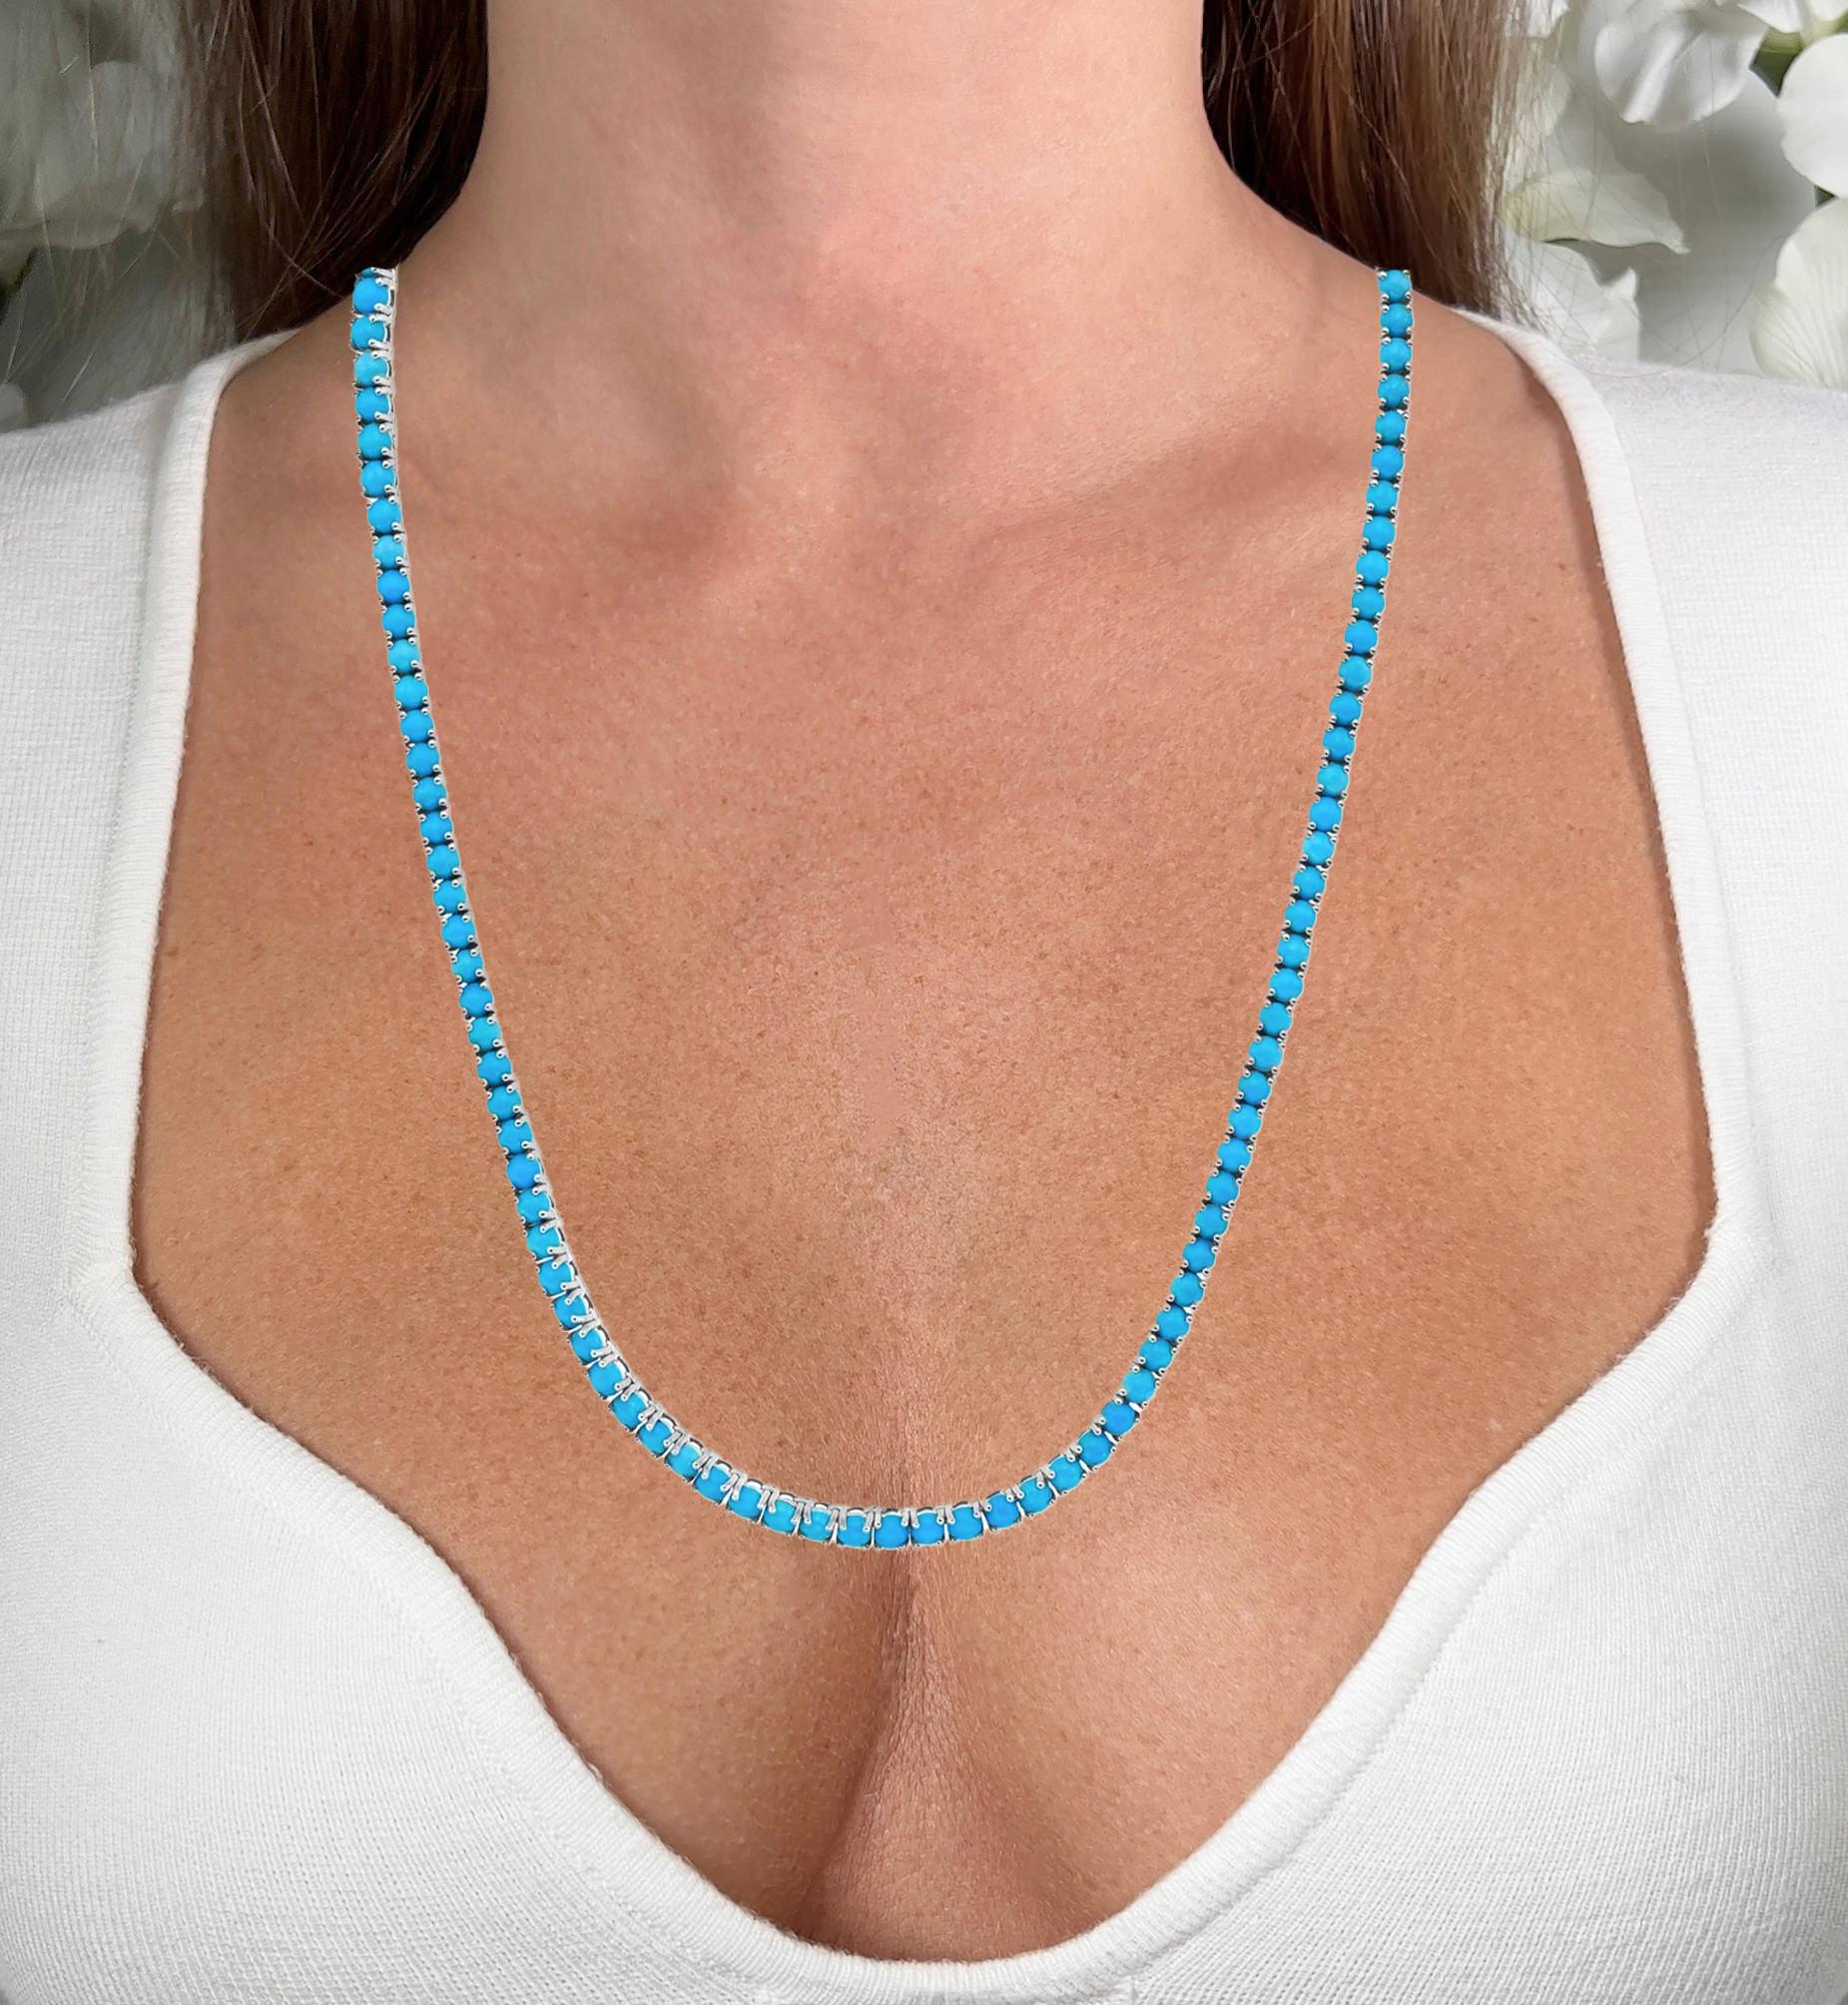 It comes with the Gemological Appraisal by GIA GG/AJP
All Gemstones are Natural
Turquoise = 16.64 Carats
Total Quantity: 120 Gemstones
Metal: 14K White Gold
Necklace Length: 18 Inches